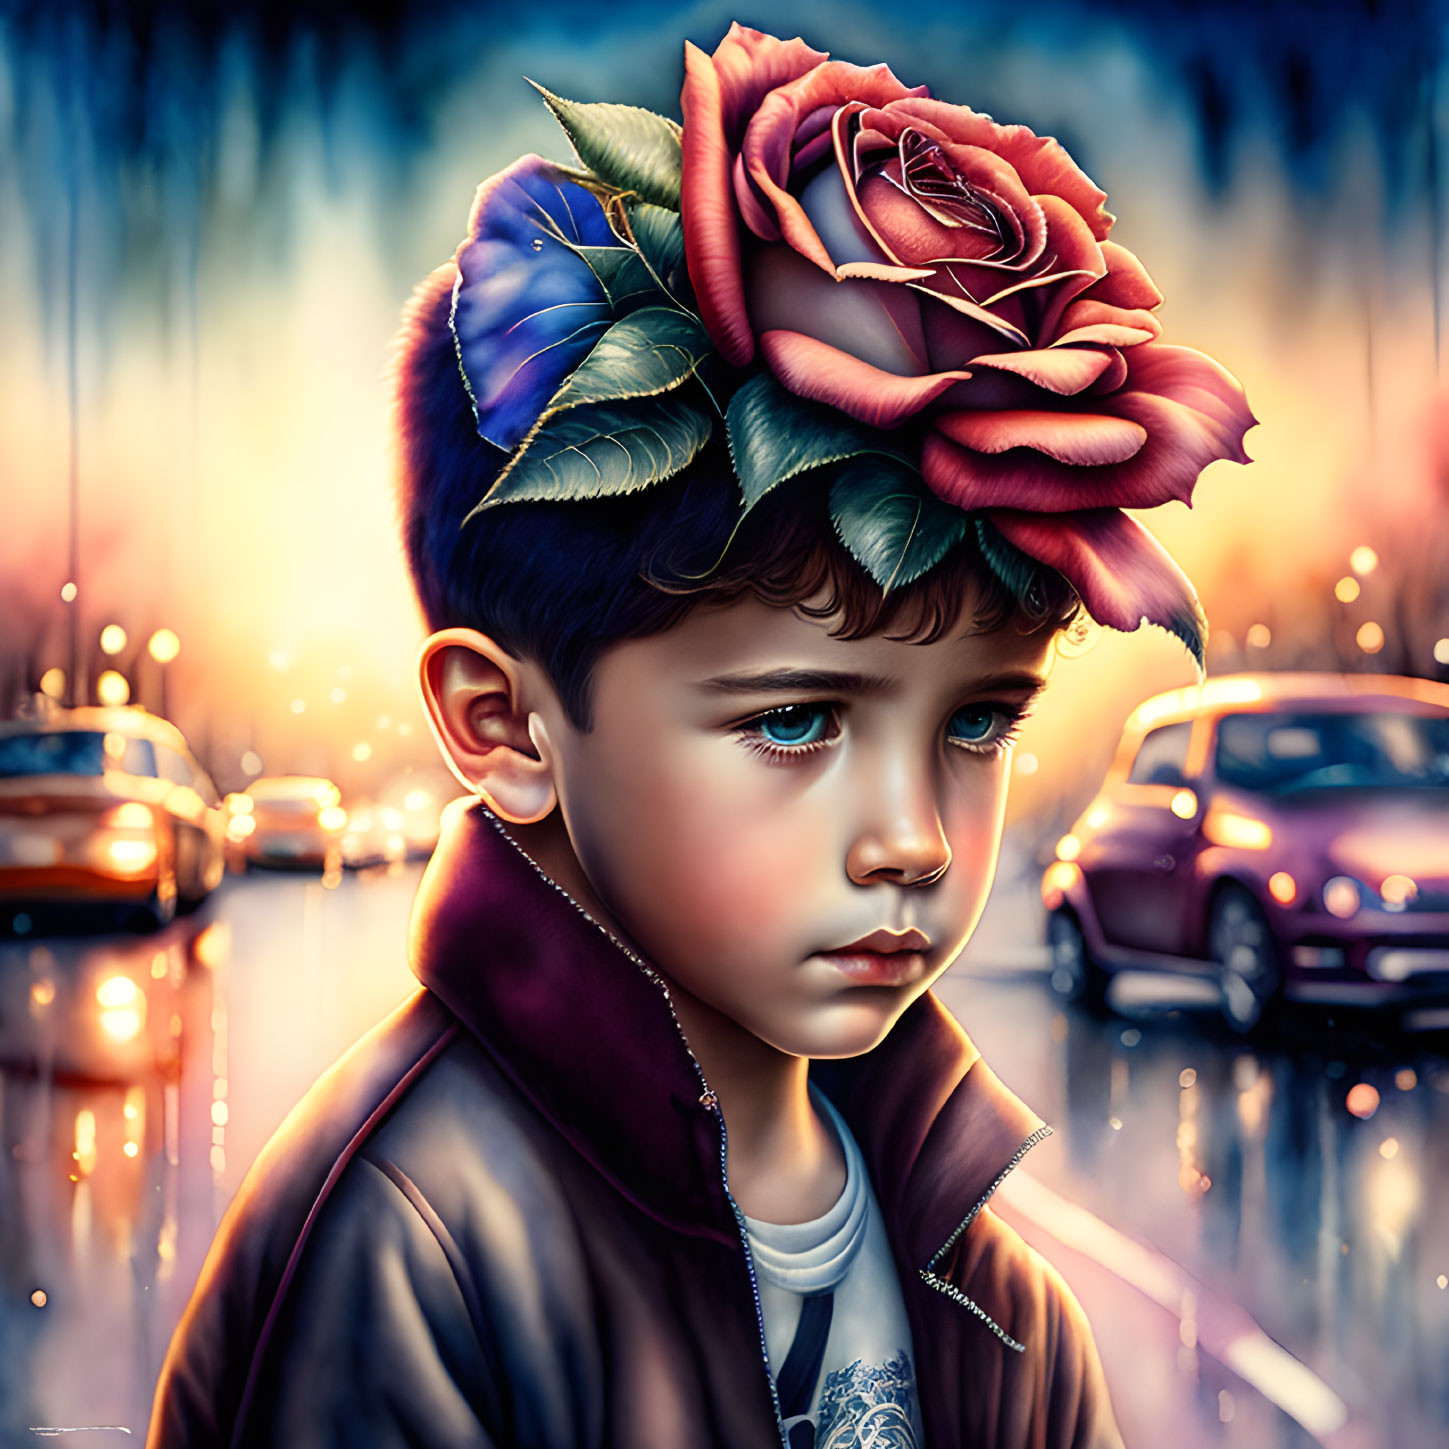 Young child with solemn expression and floral headpiece against city night backdrop.